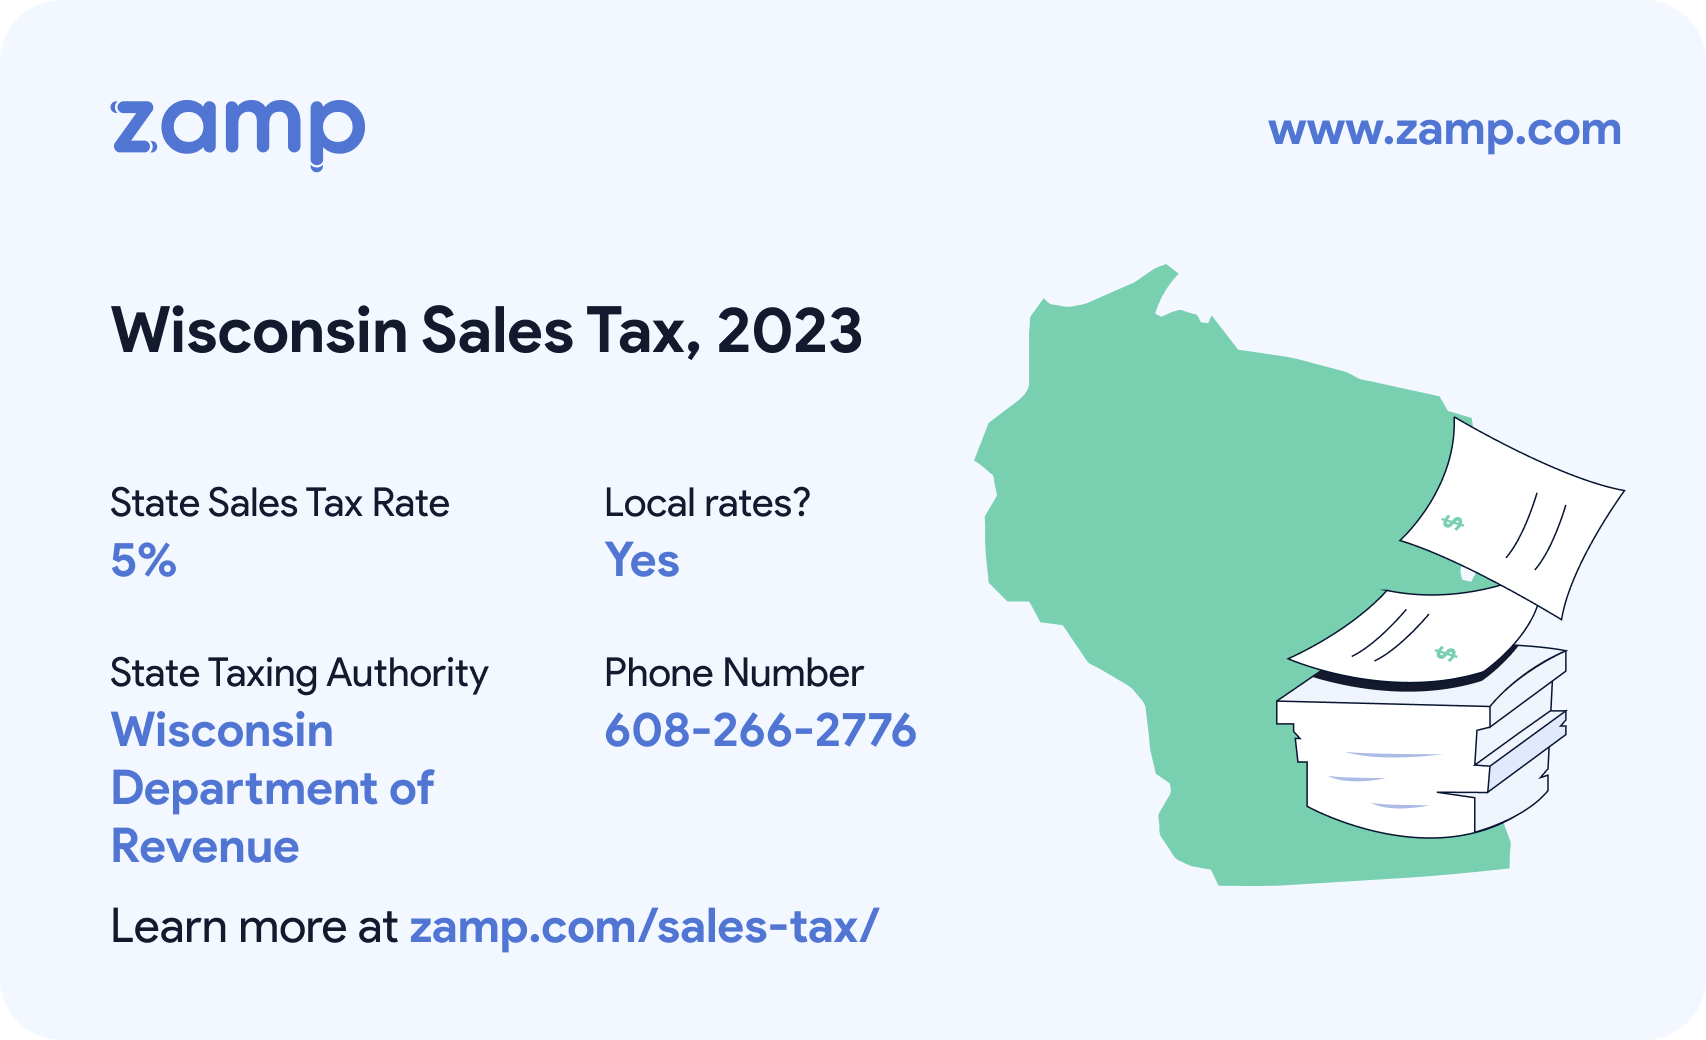 Wisconsin basic sales tax info for 2023 - State sales tax rate: 5%, Local rates? Yes; State Taxing Authority: Wisconsin Department of Revenue; and phone number: 608-266-2776